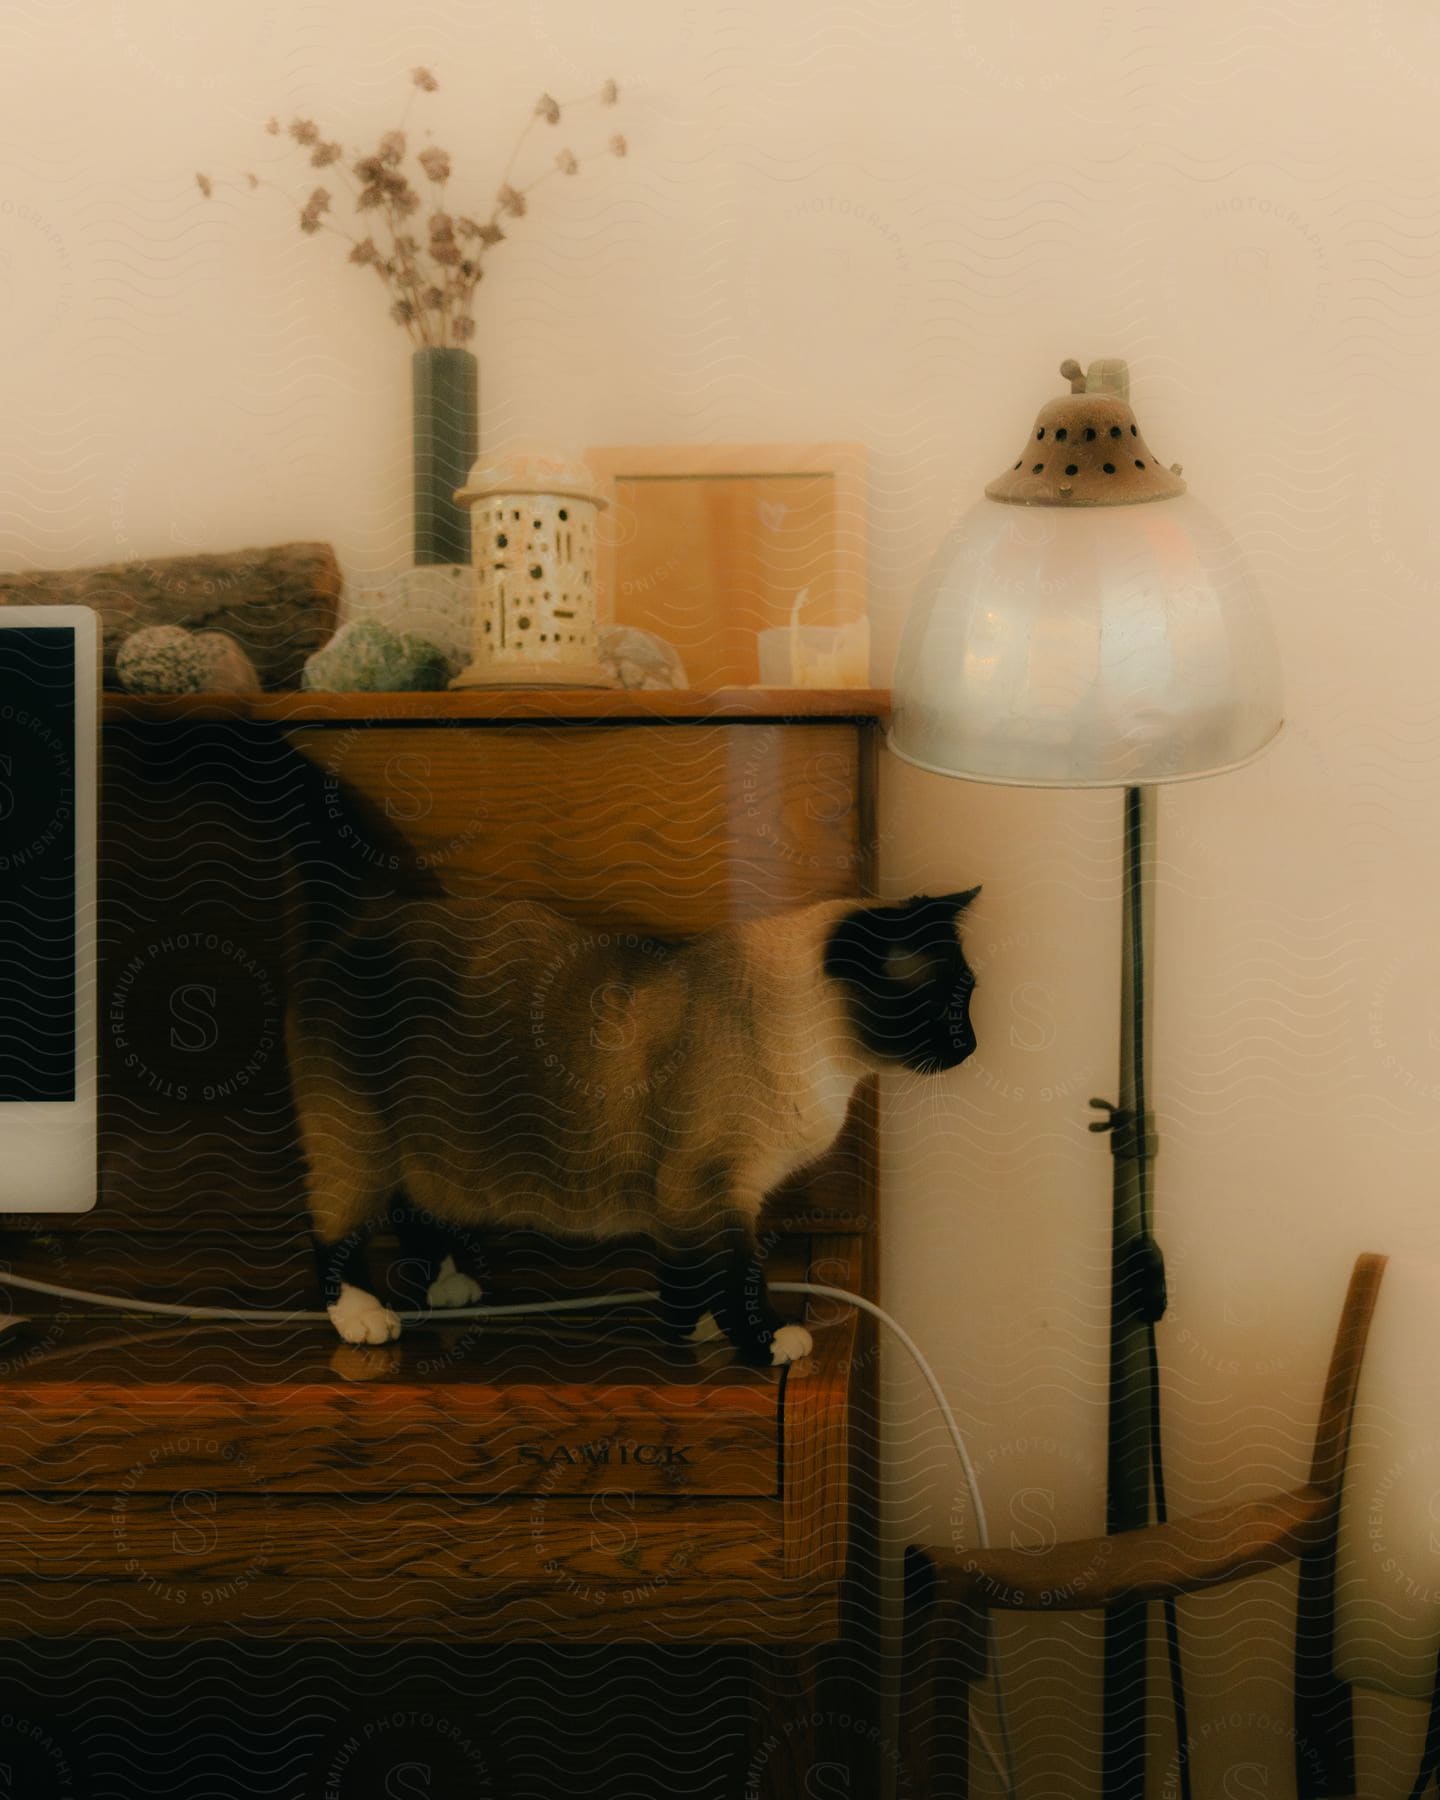 A Siamese cat stands on top of a wooden desk in a home.